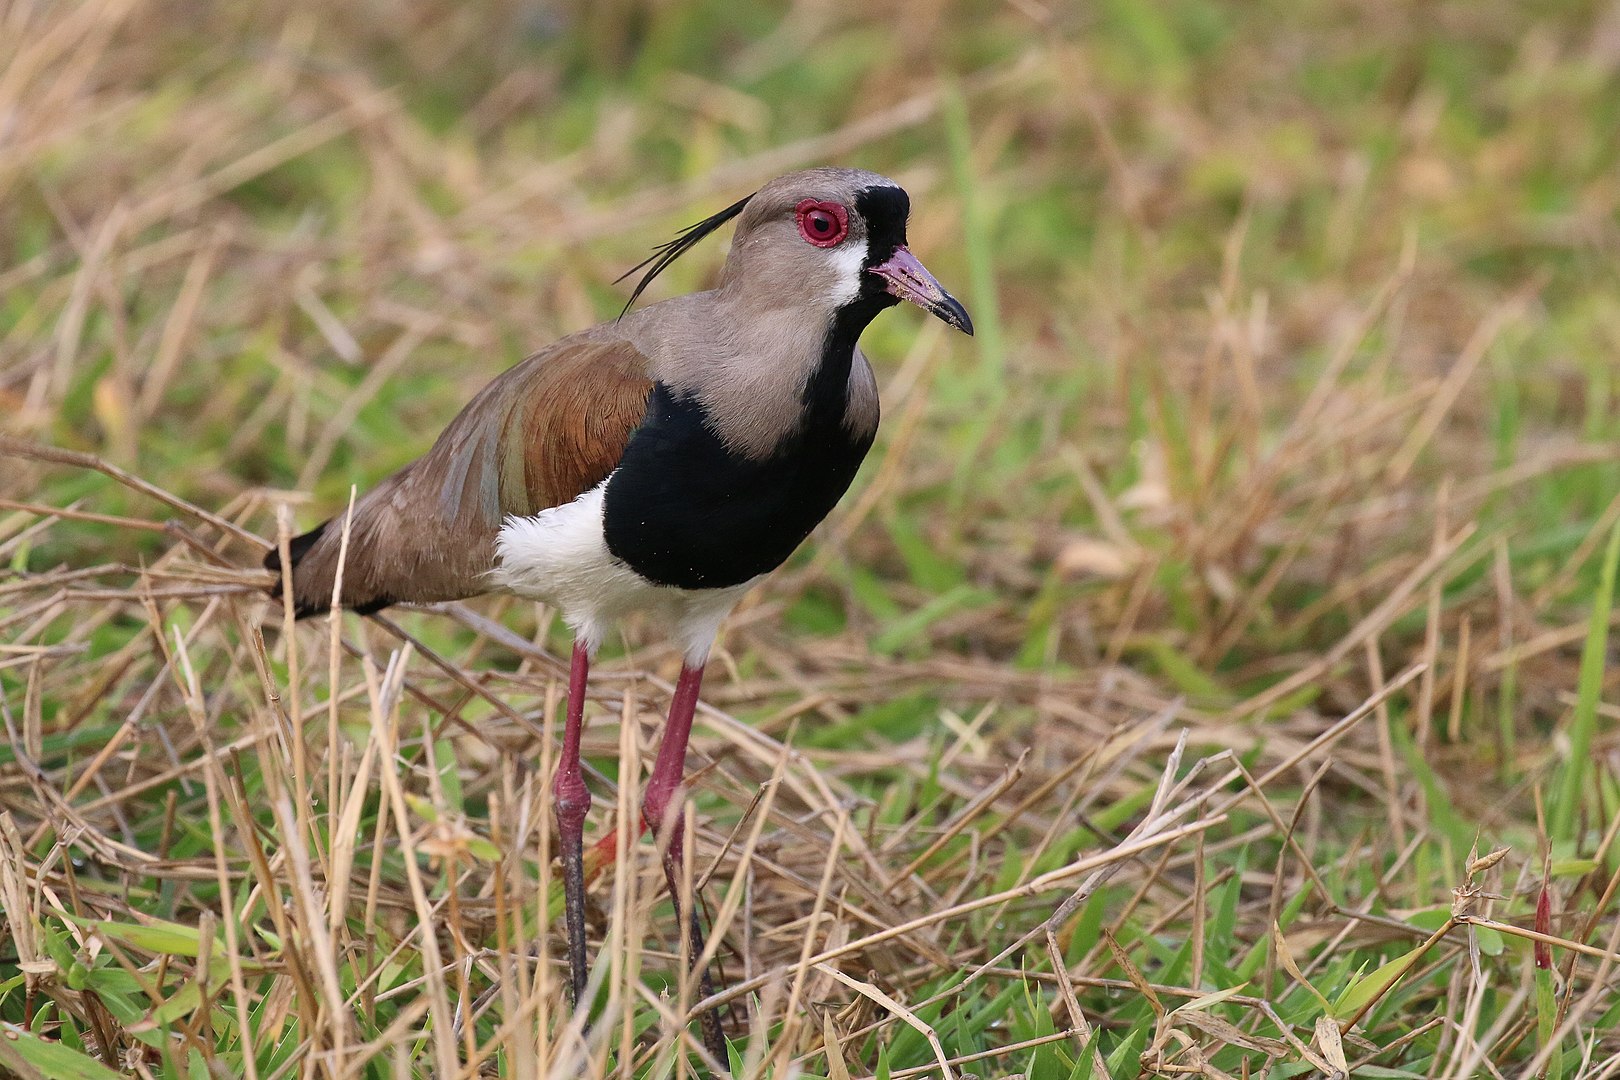 The southern lapwing